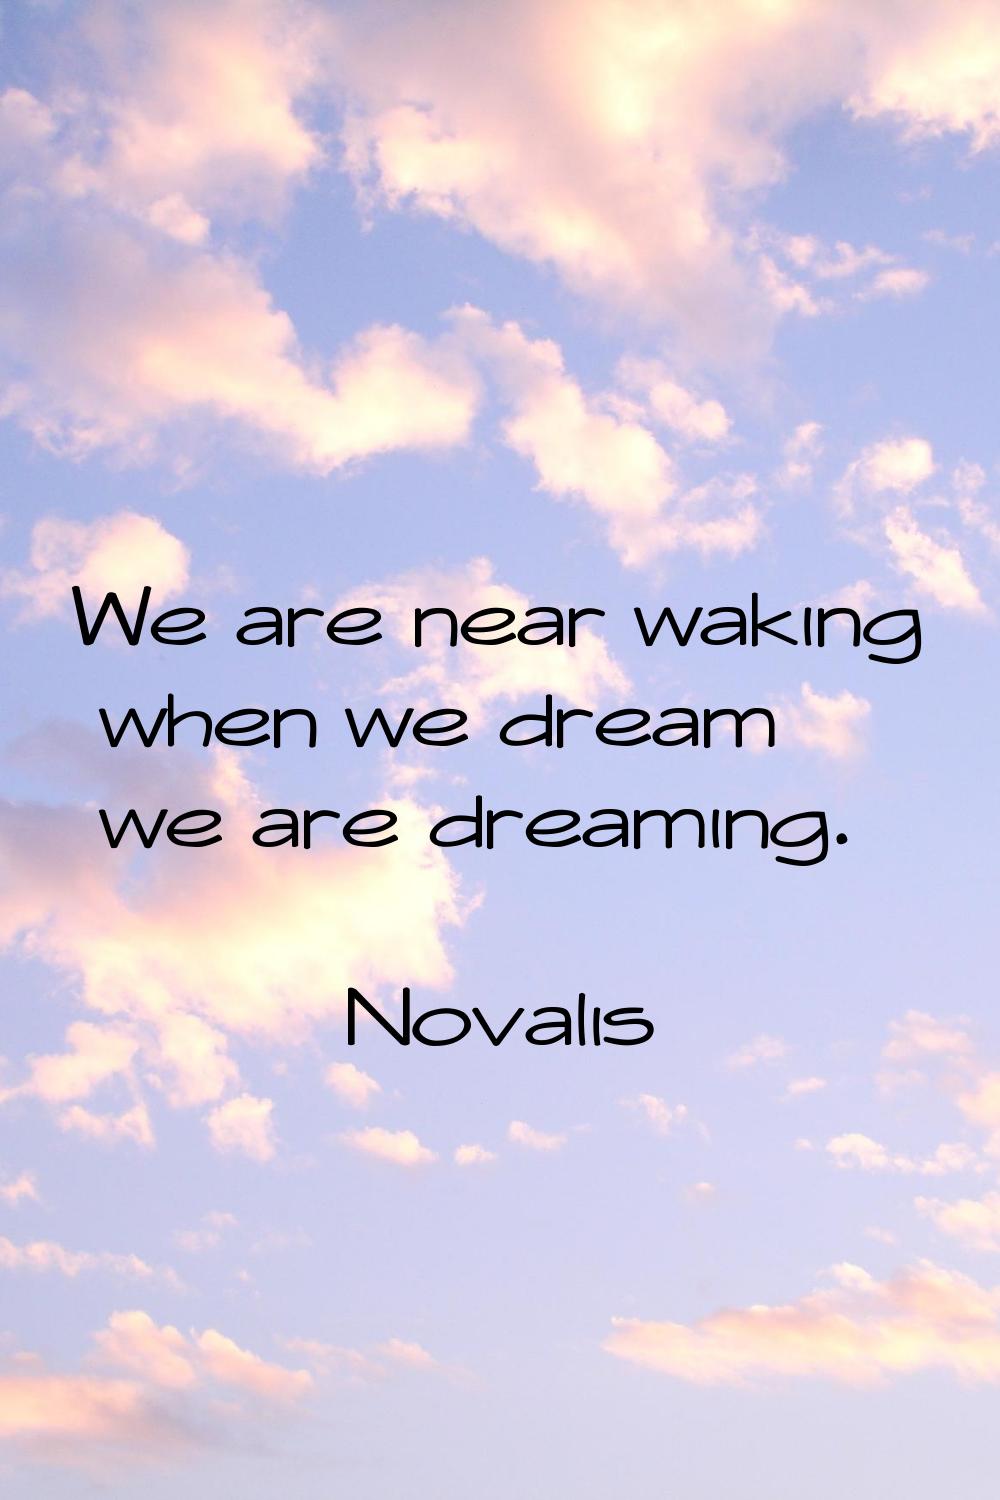 We are near waking when we dream we are dreaming.